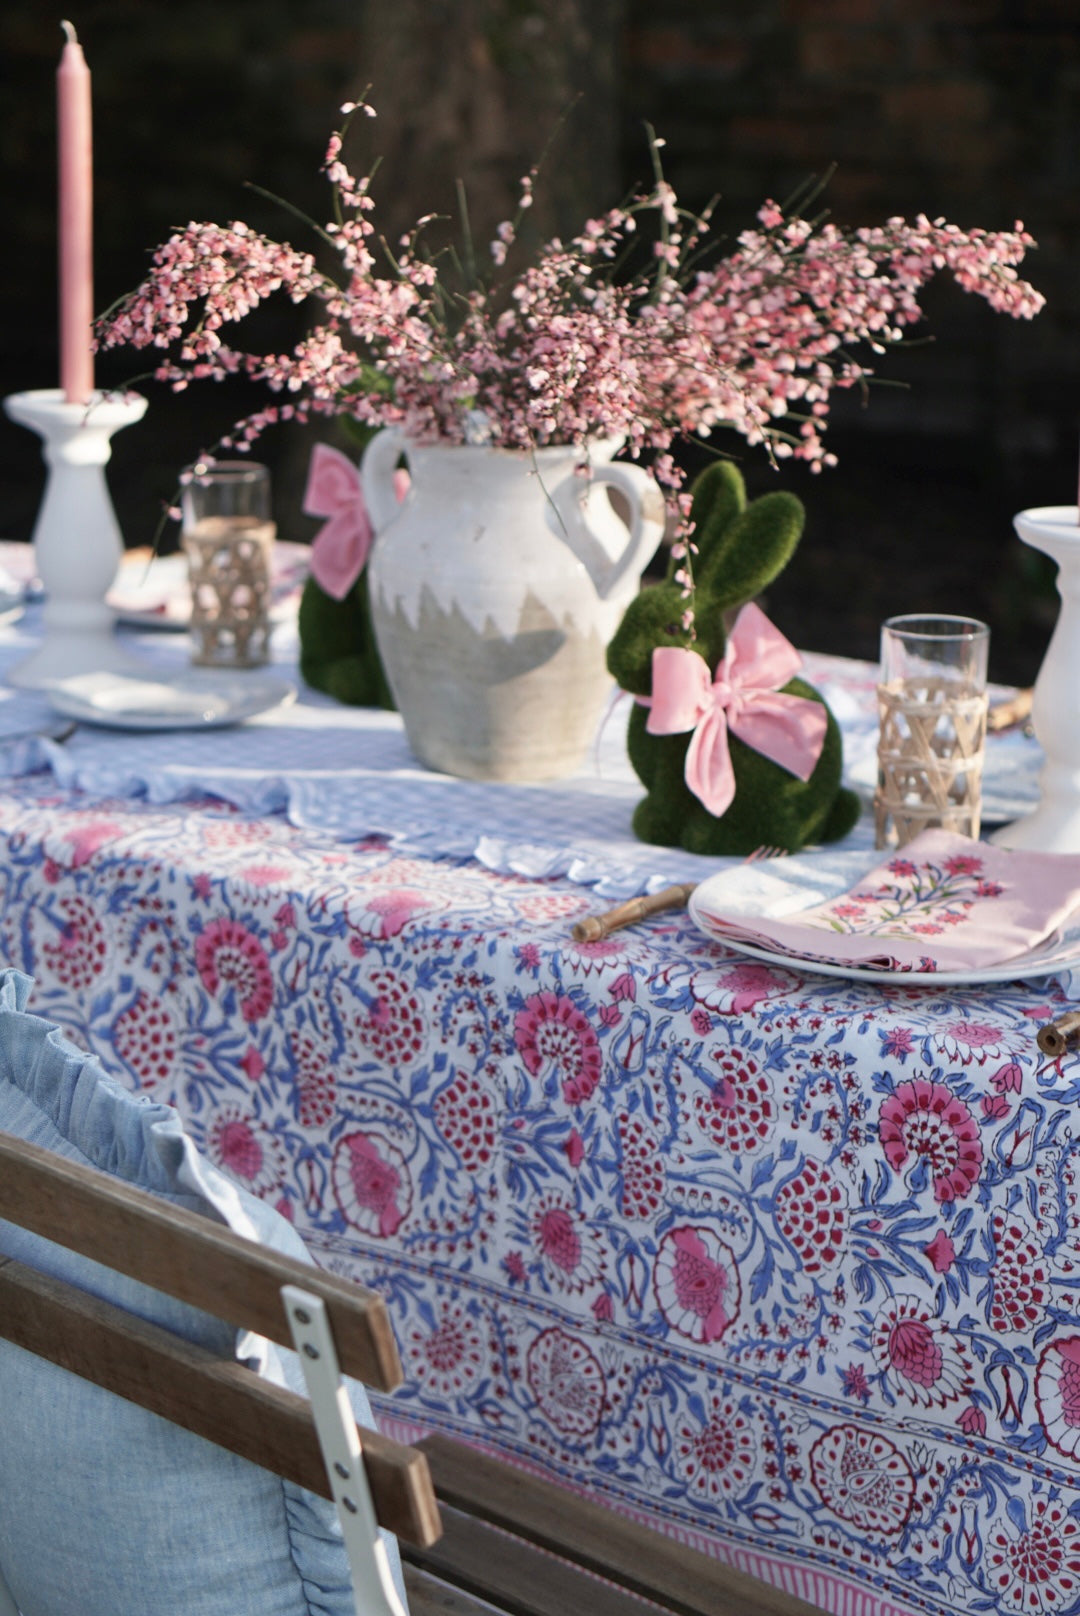 What Is The Best Fabric for Sewing Tablecloths?